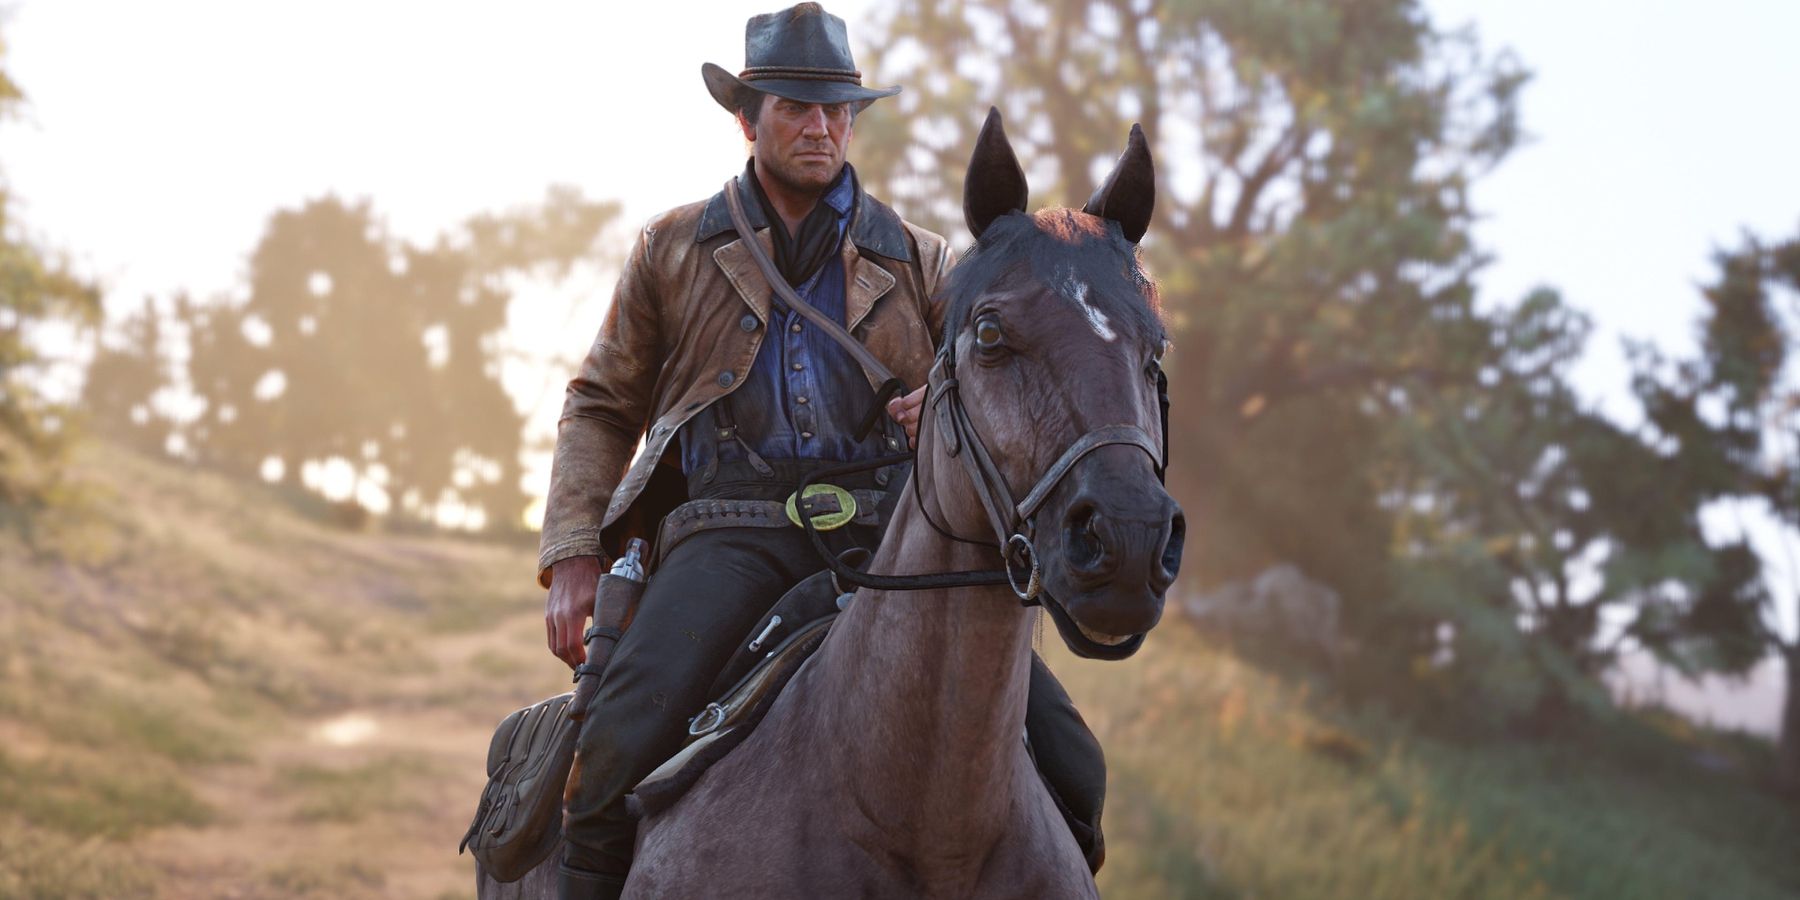 Rumor: New Red Dead Redemption 2 Update Could Be Coming Soon